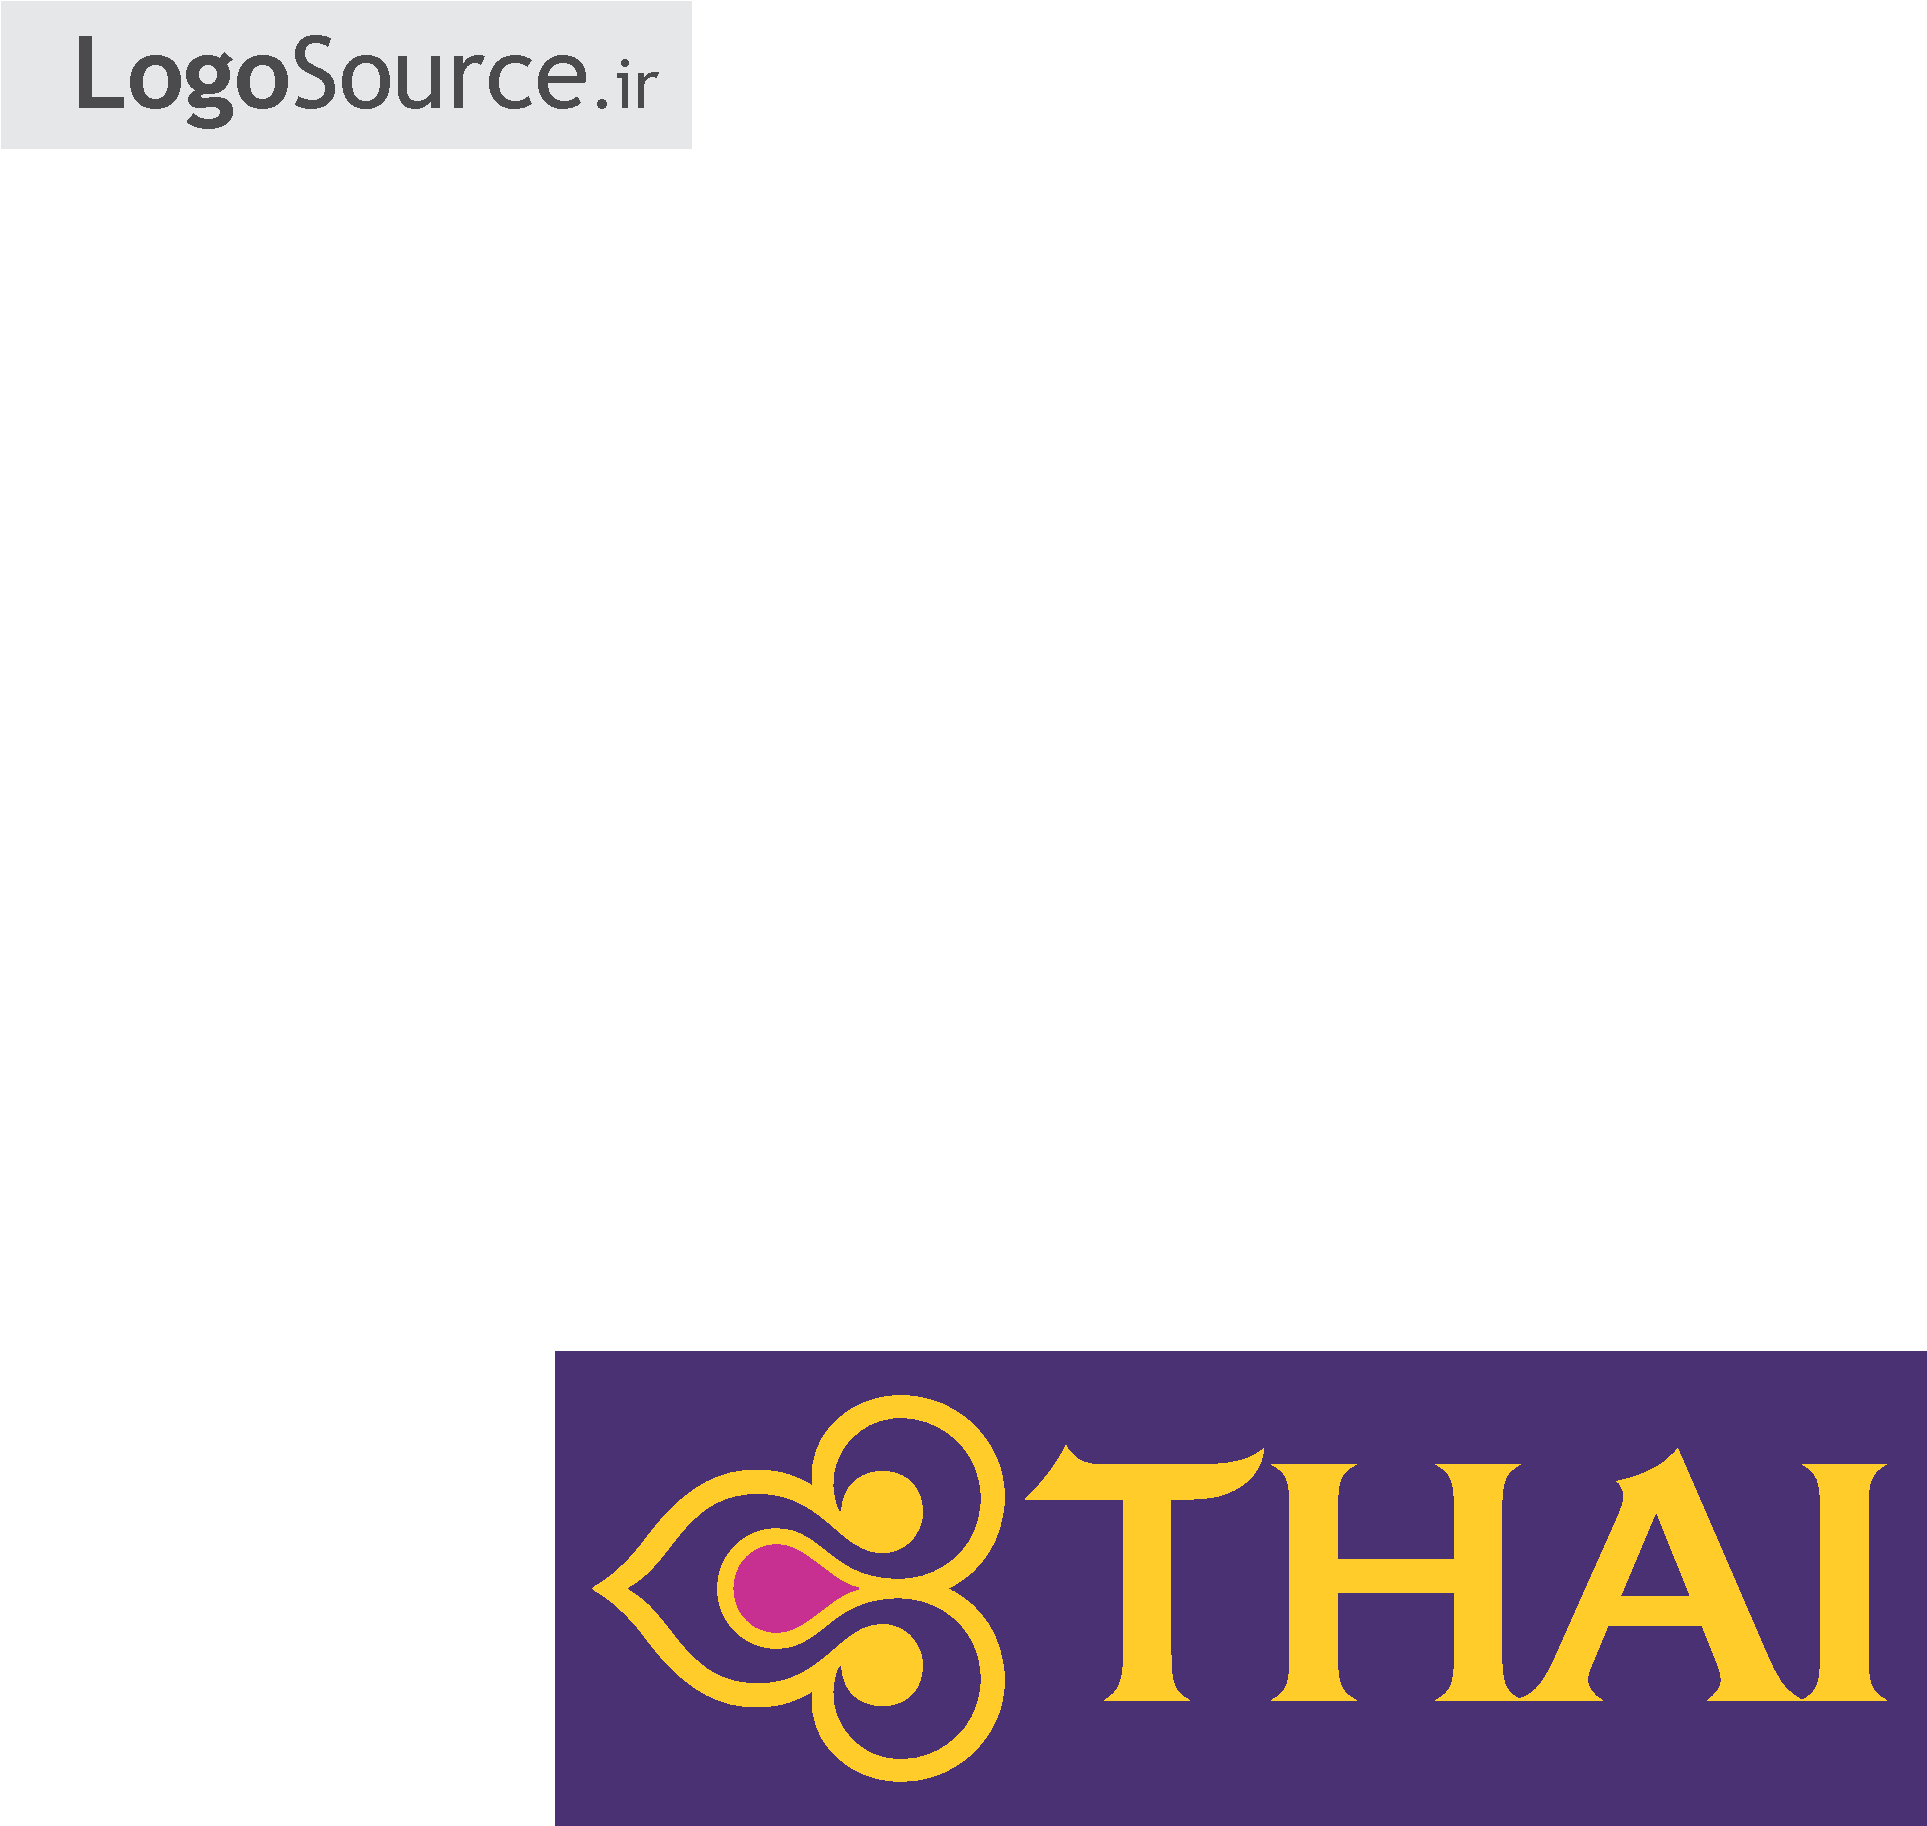 File Png - Thai Airways Company (2480x3507)